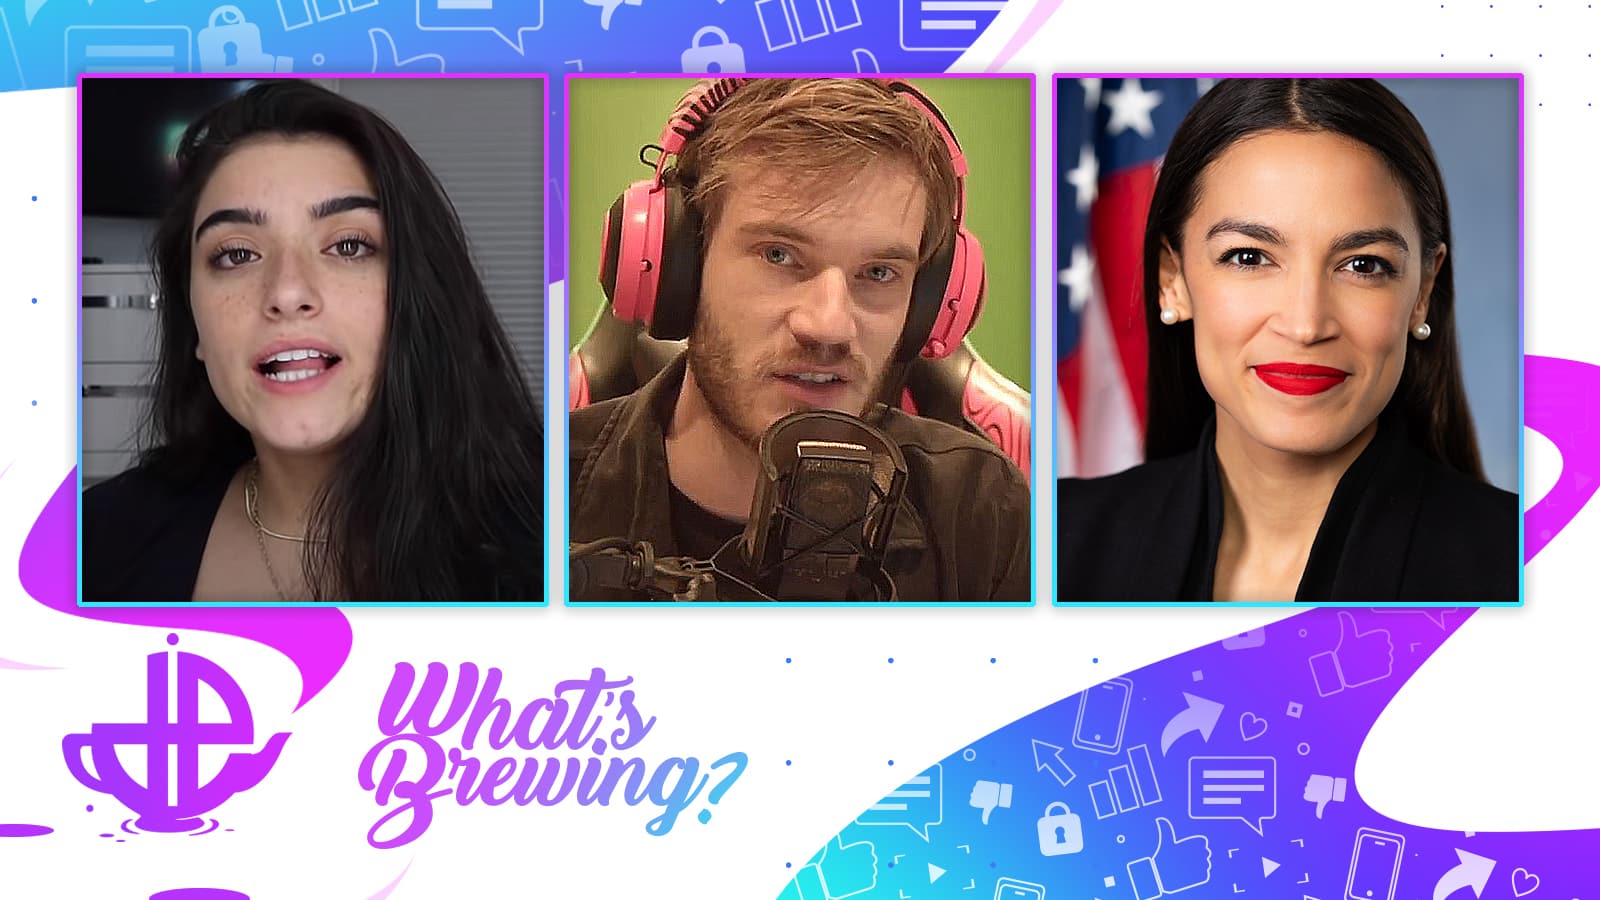 Photos of Dixie D'Amelio, PewDiePie and AOC are shown against the What's Brewing background.